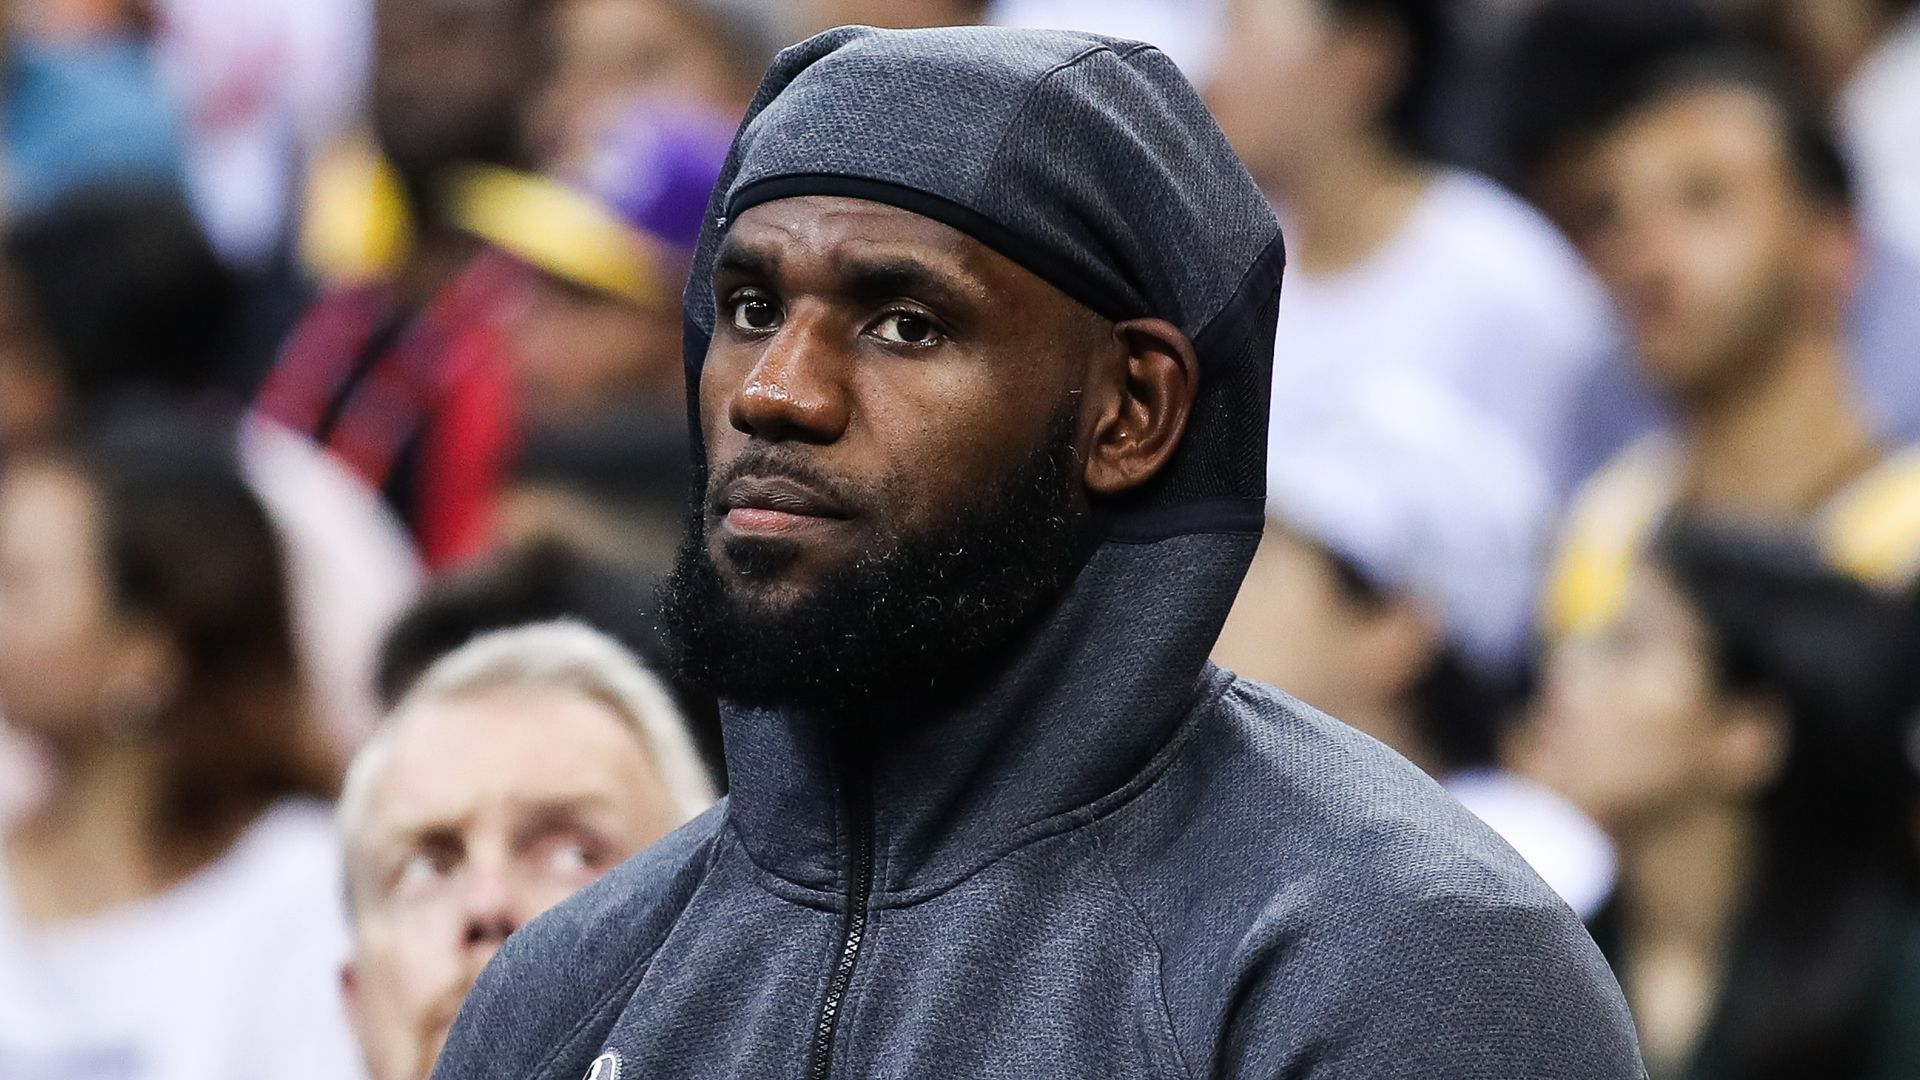 Lebron in a hoodie.